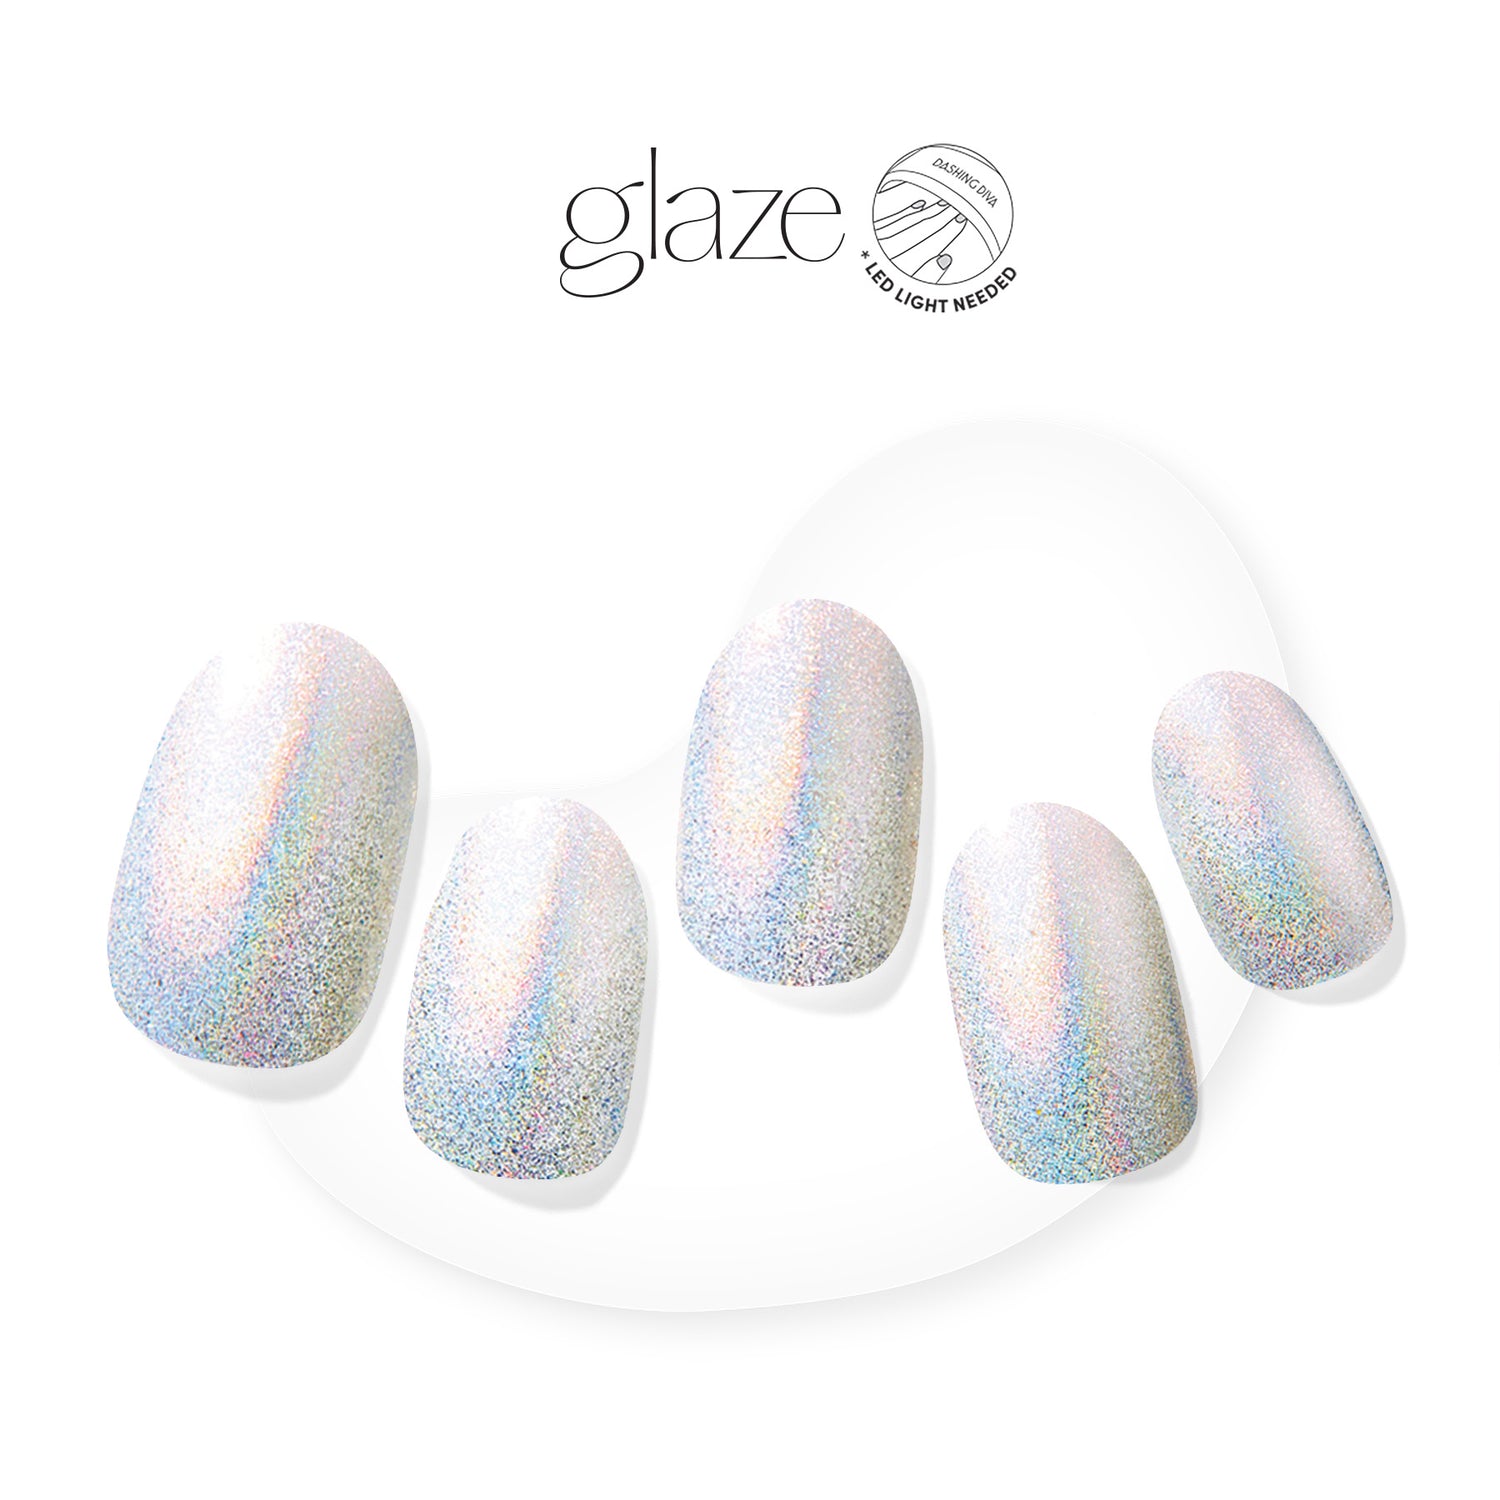 Semi-cured iridescent silver gel nail strips featuring holographic shimmer with mega volume and maximum shine.